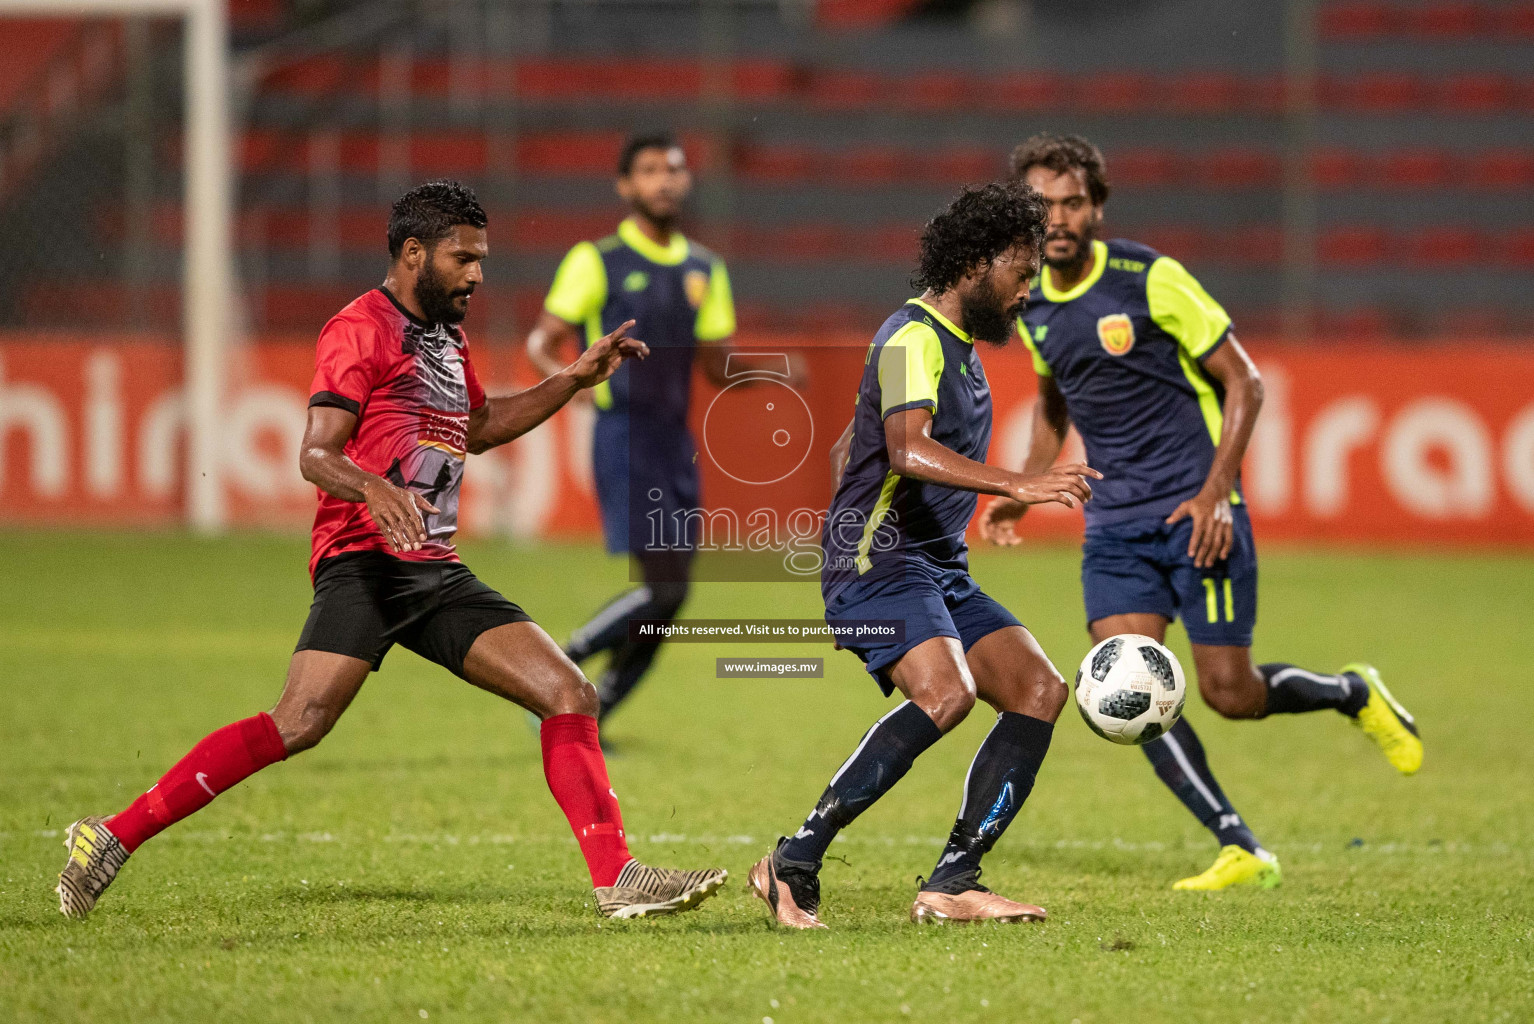 Foakaidhoo FC vs United Victory in Dhiraagu Dhivehi Premier League 2019 held in Male', Maldives on 15th June. Photos: Suadh Abdul Sattar/images.mv 28 6 hours ago